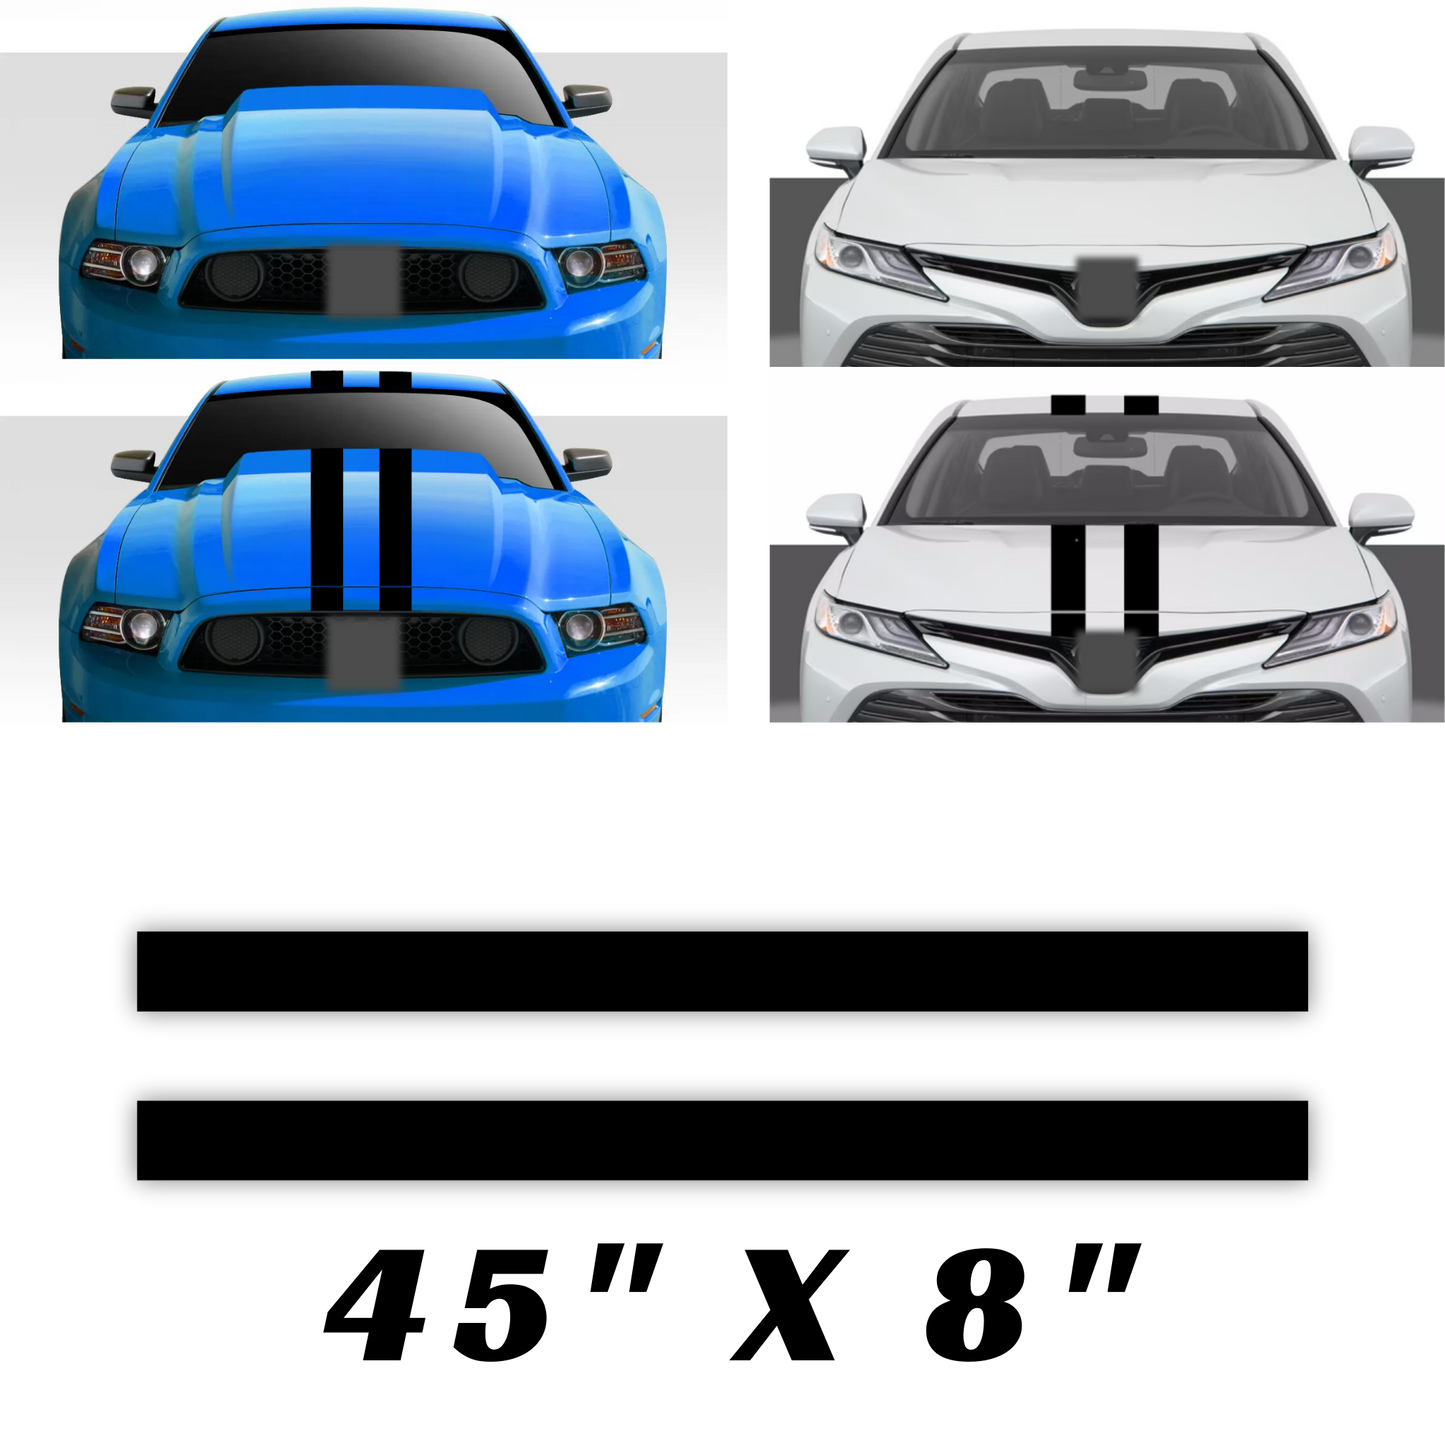 Universal Racing Stripe For Hood Roof Side Decal Car Truck